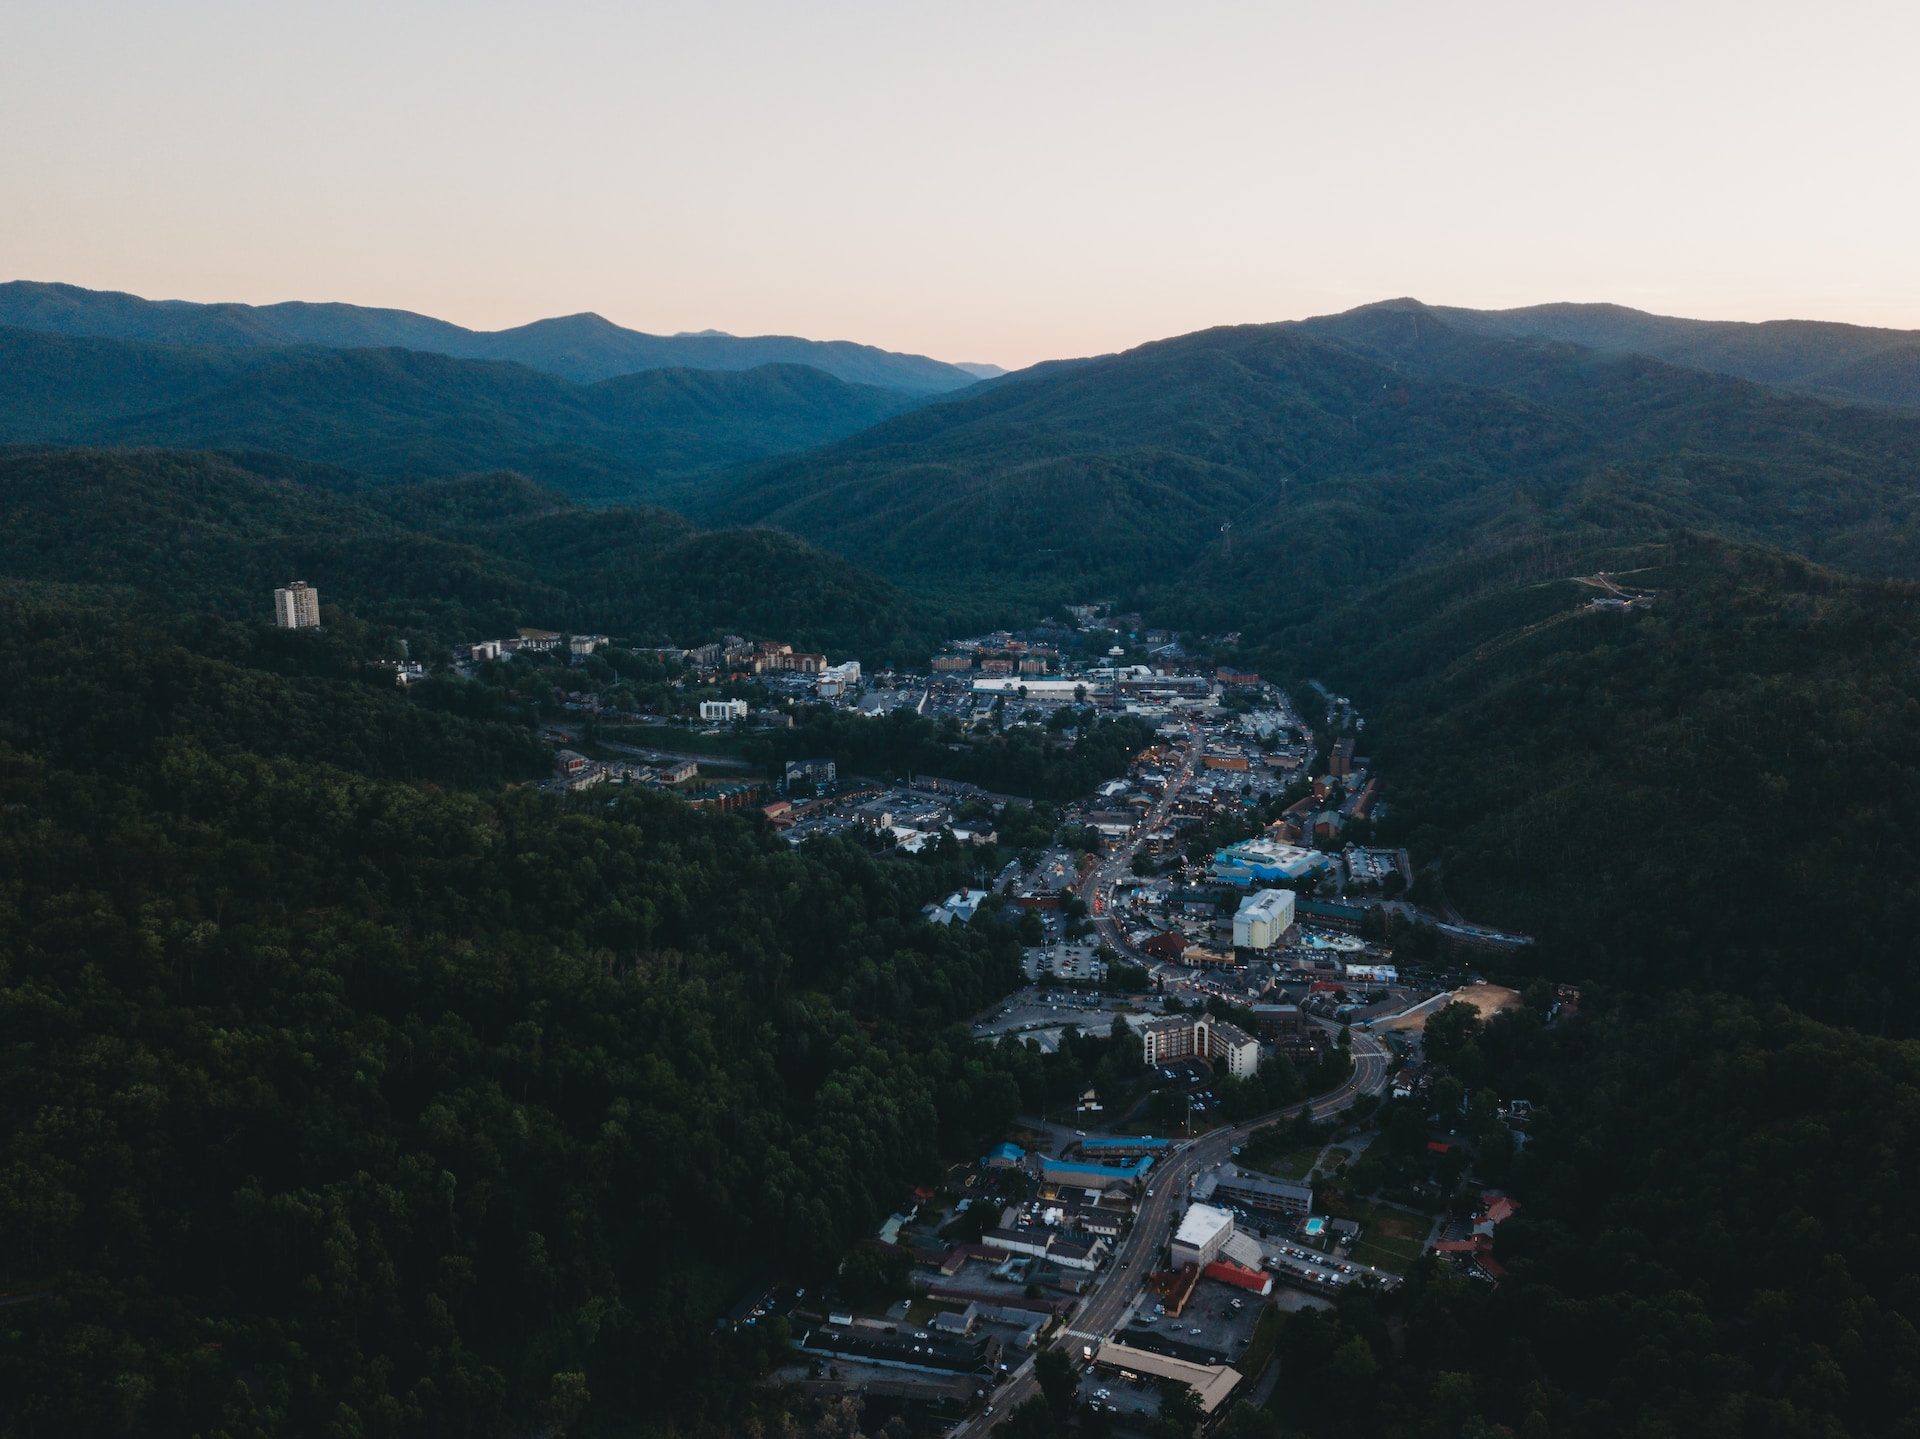 A drone shot of Gatlinburg from up high.